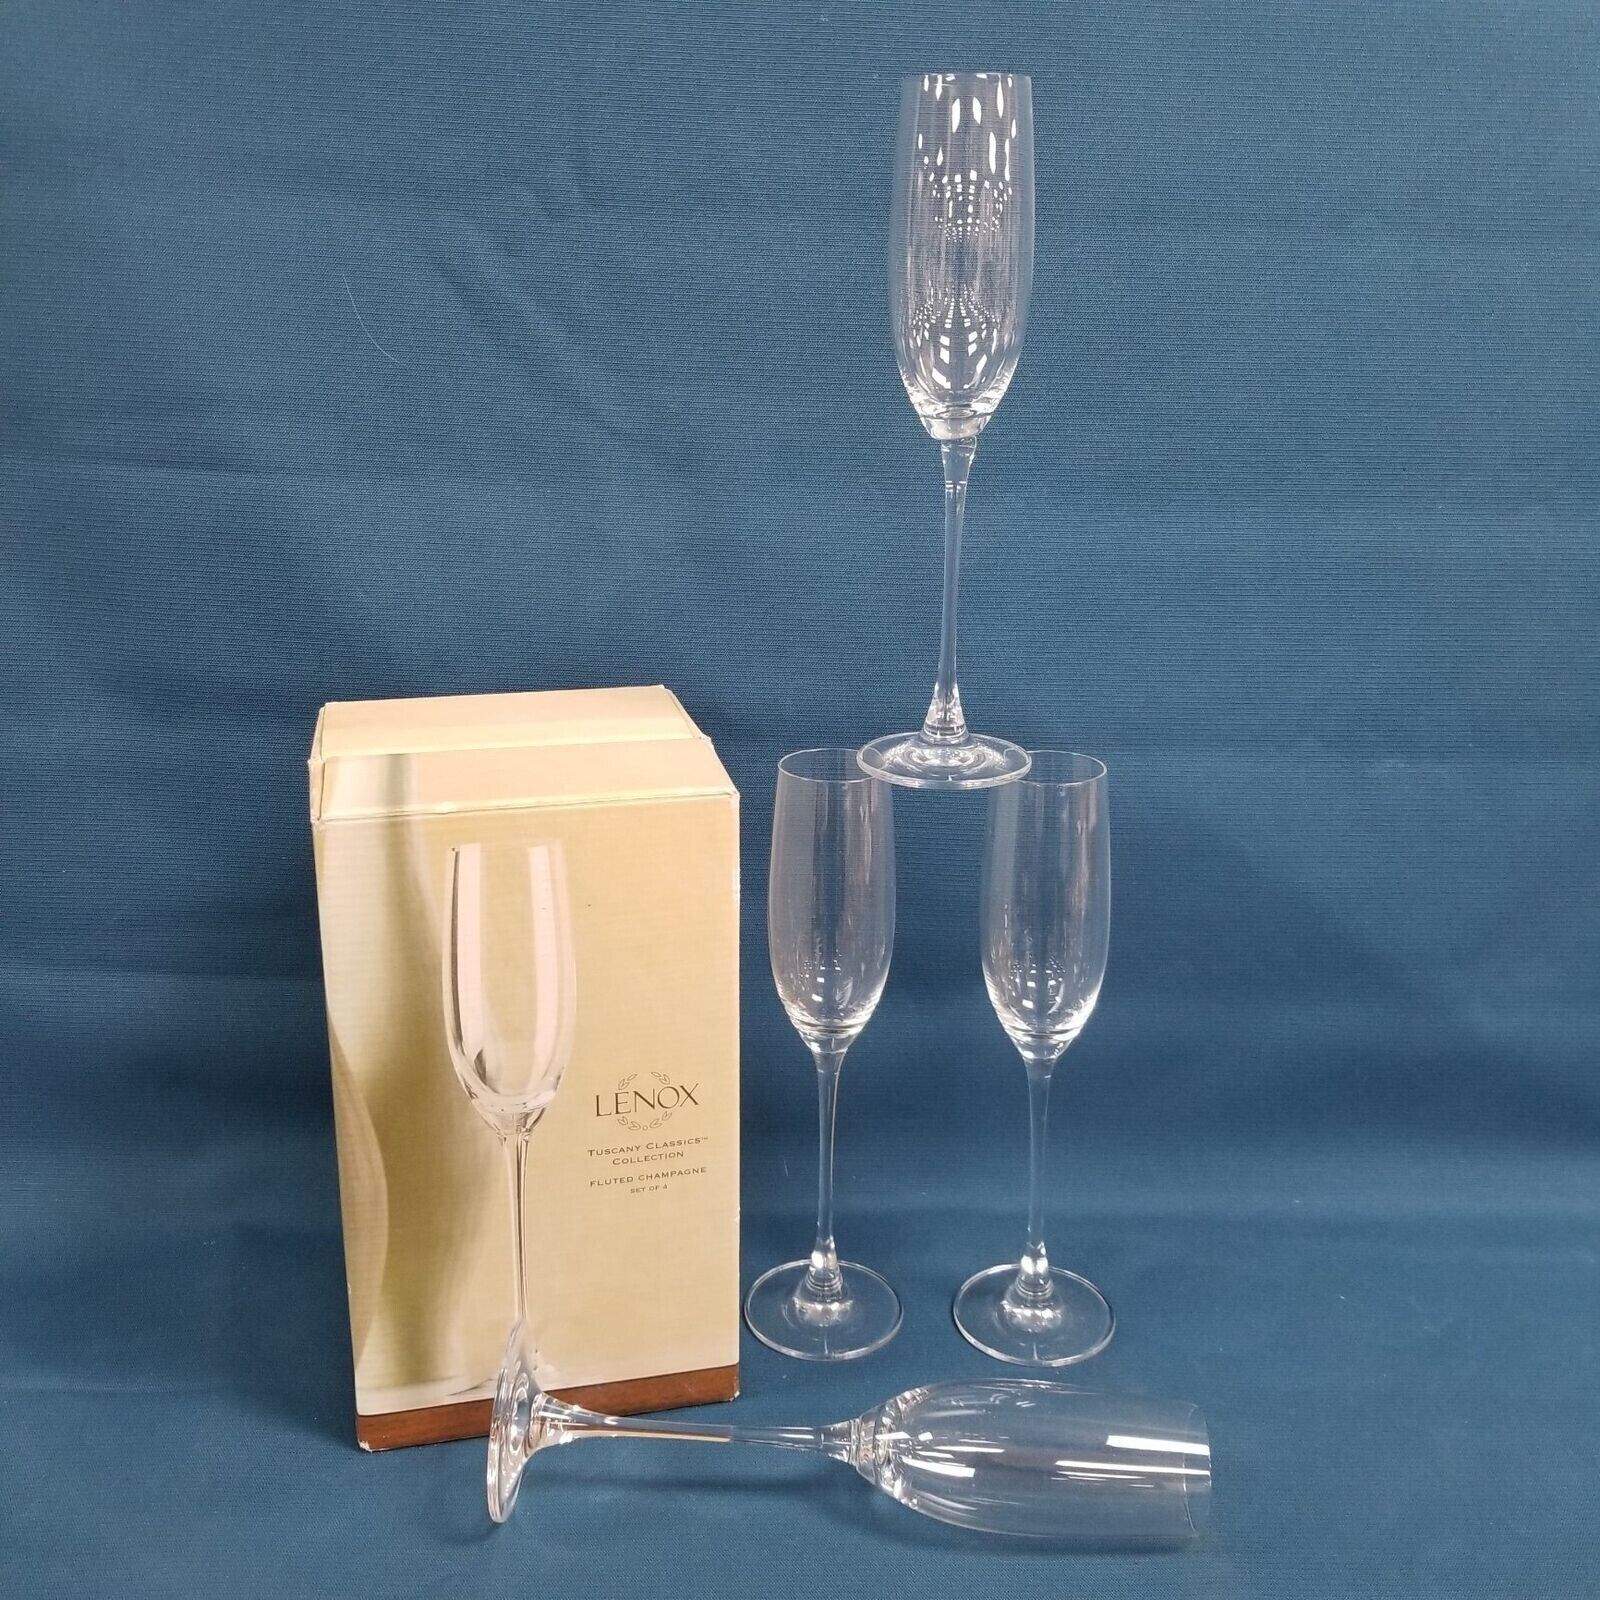 Lenox Tuscany Classics Collection Fluted Champagne Glasses Set of 4 With Box